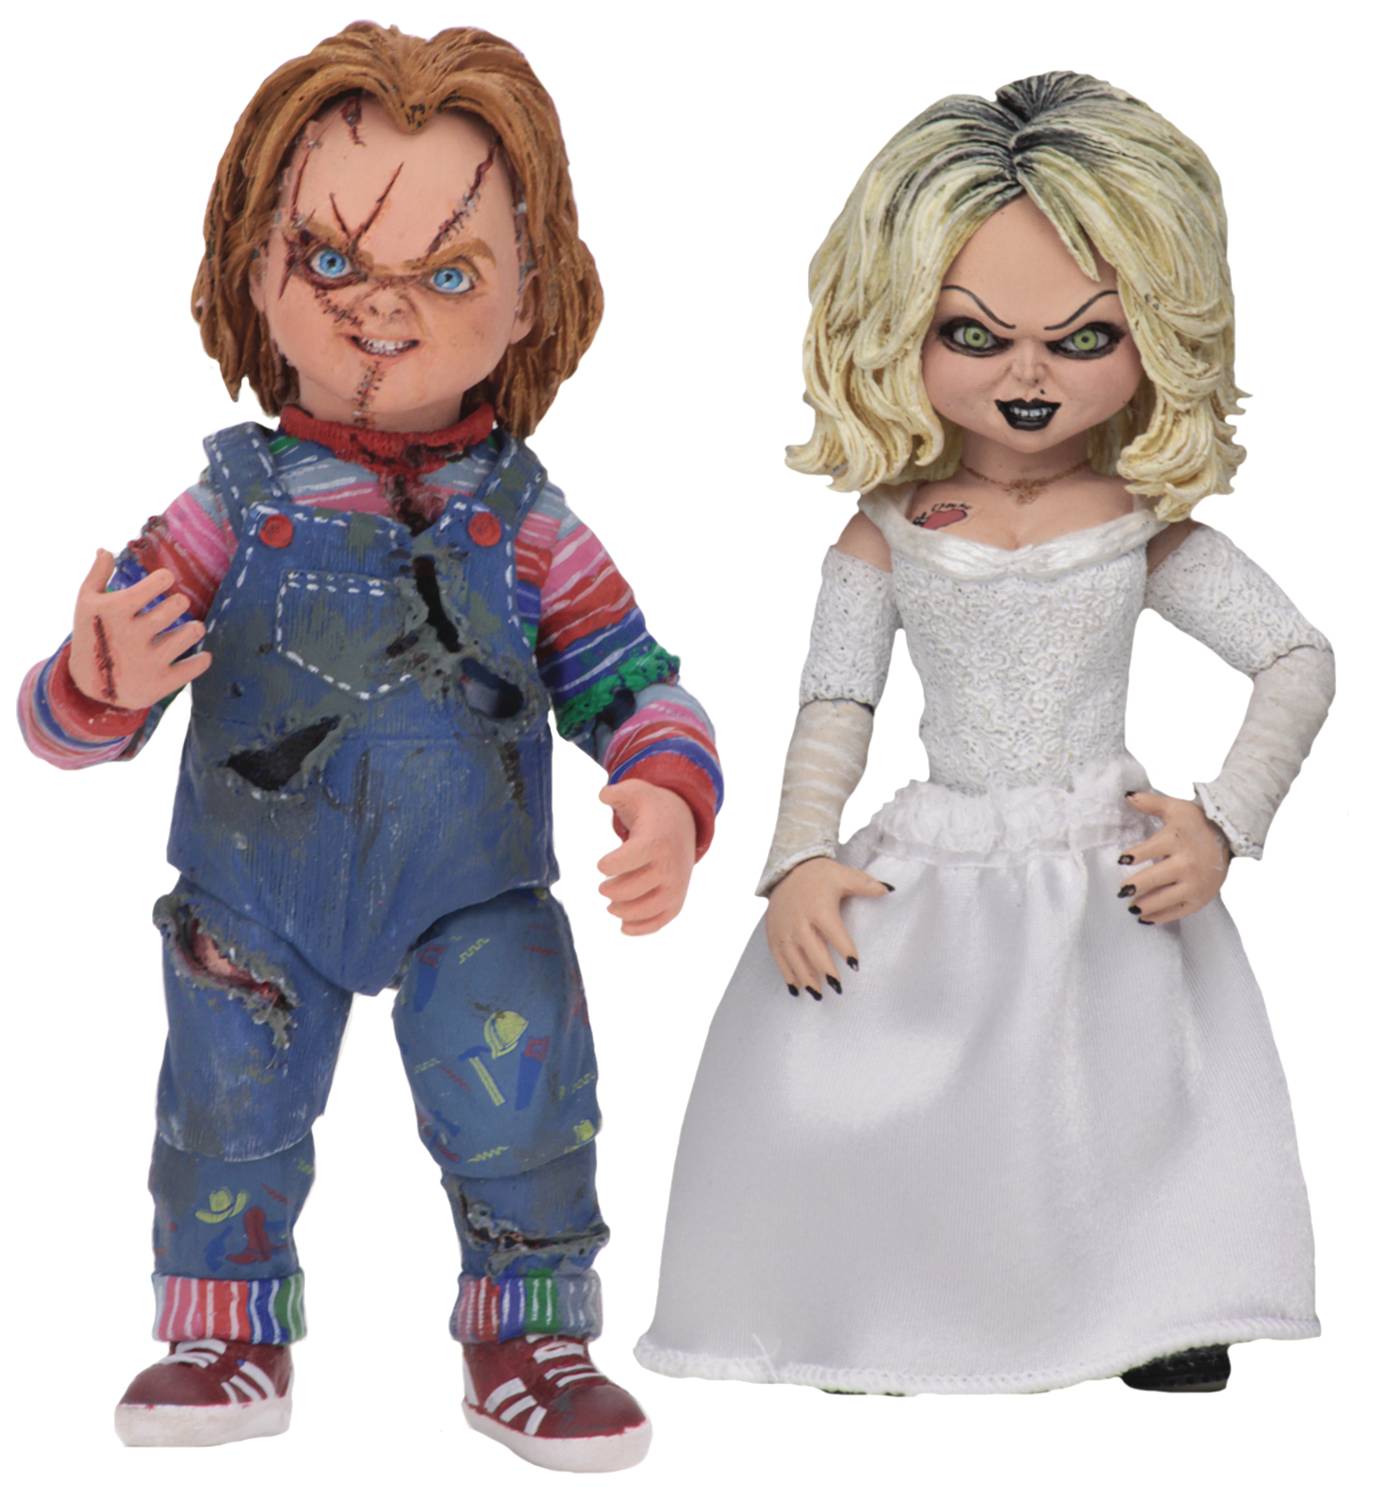 Bride of Chucky Ultimate Chucky & Tiffany 7 Inch Scale Action Figure 2pk